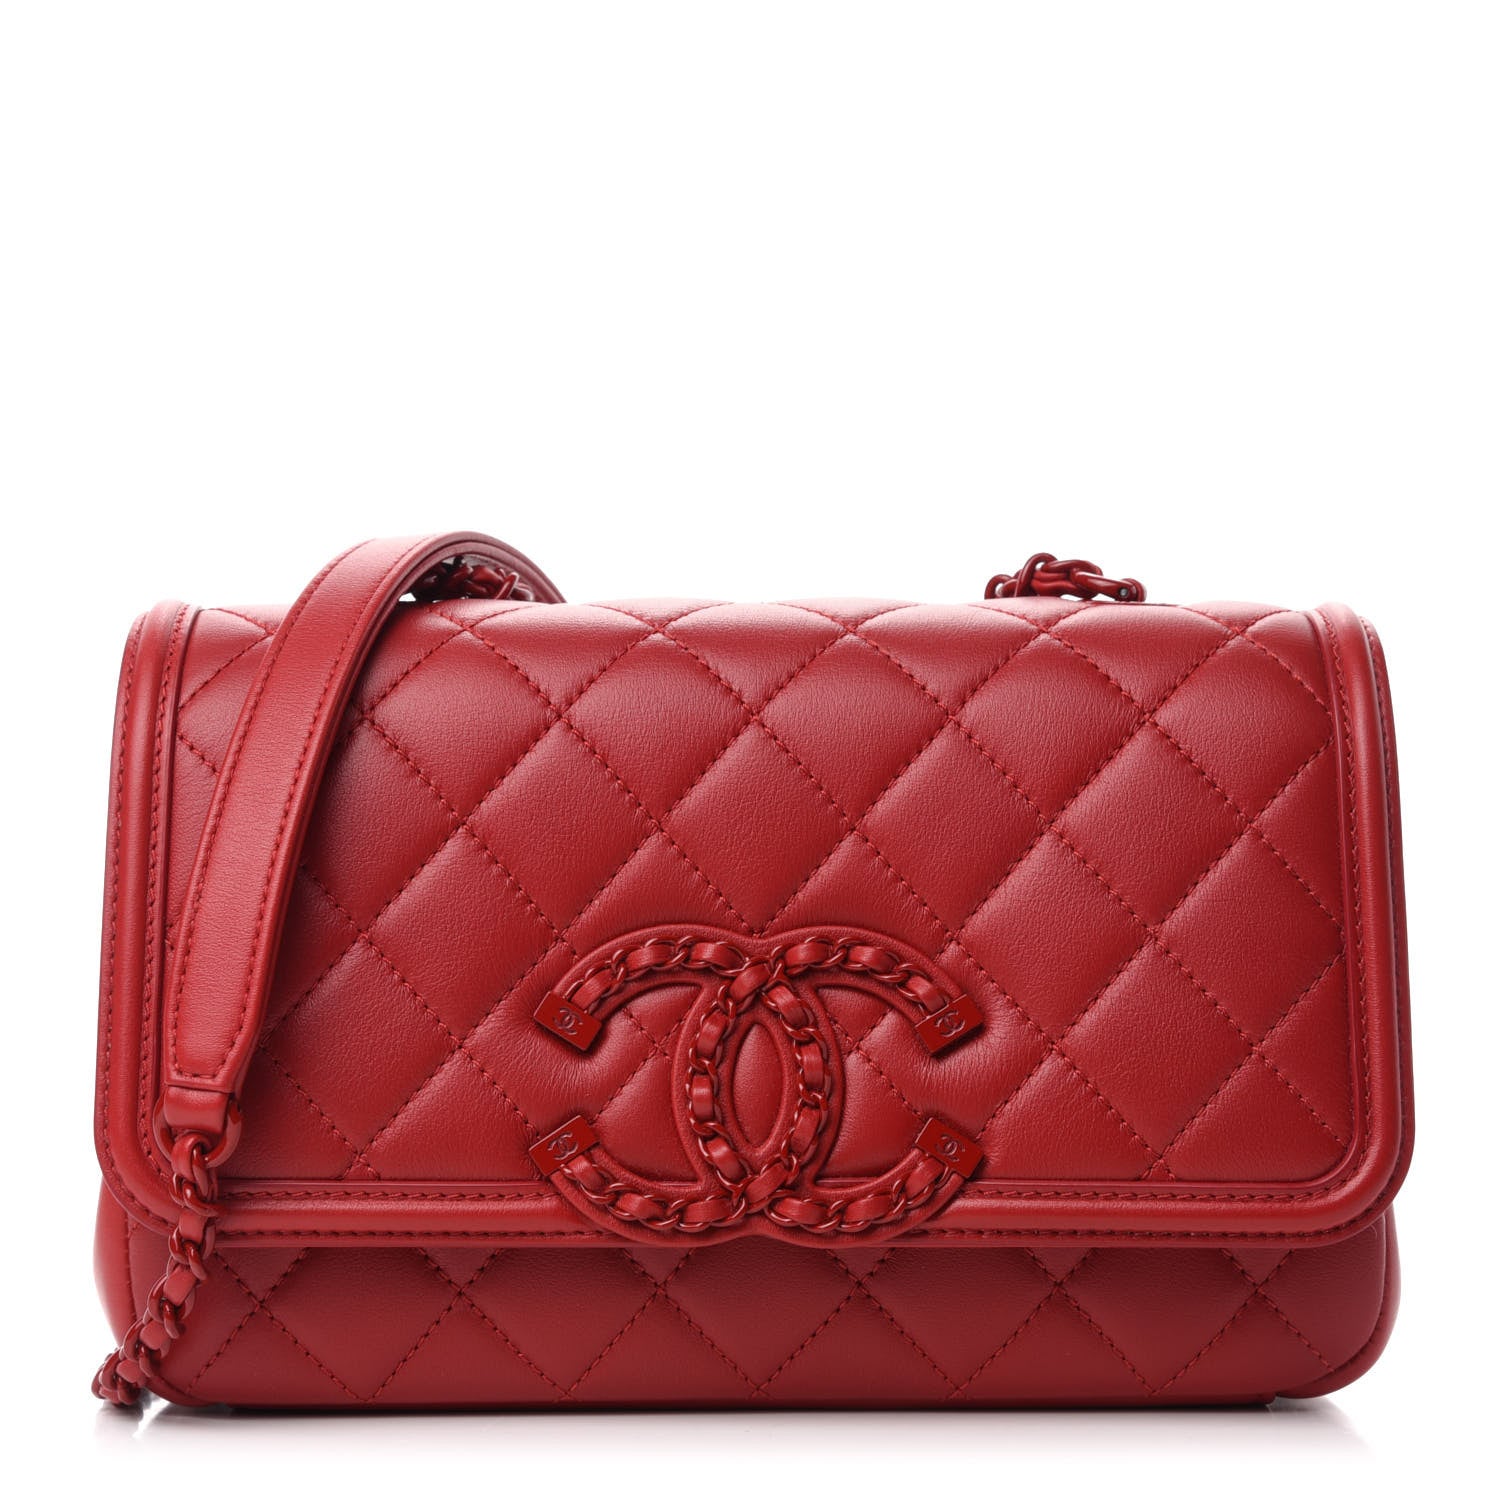 CHANEL Boy Small Quilted Leather Shoulder Bag Red